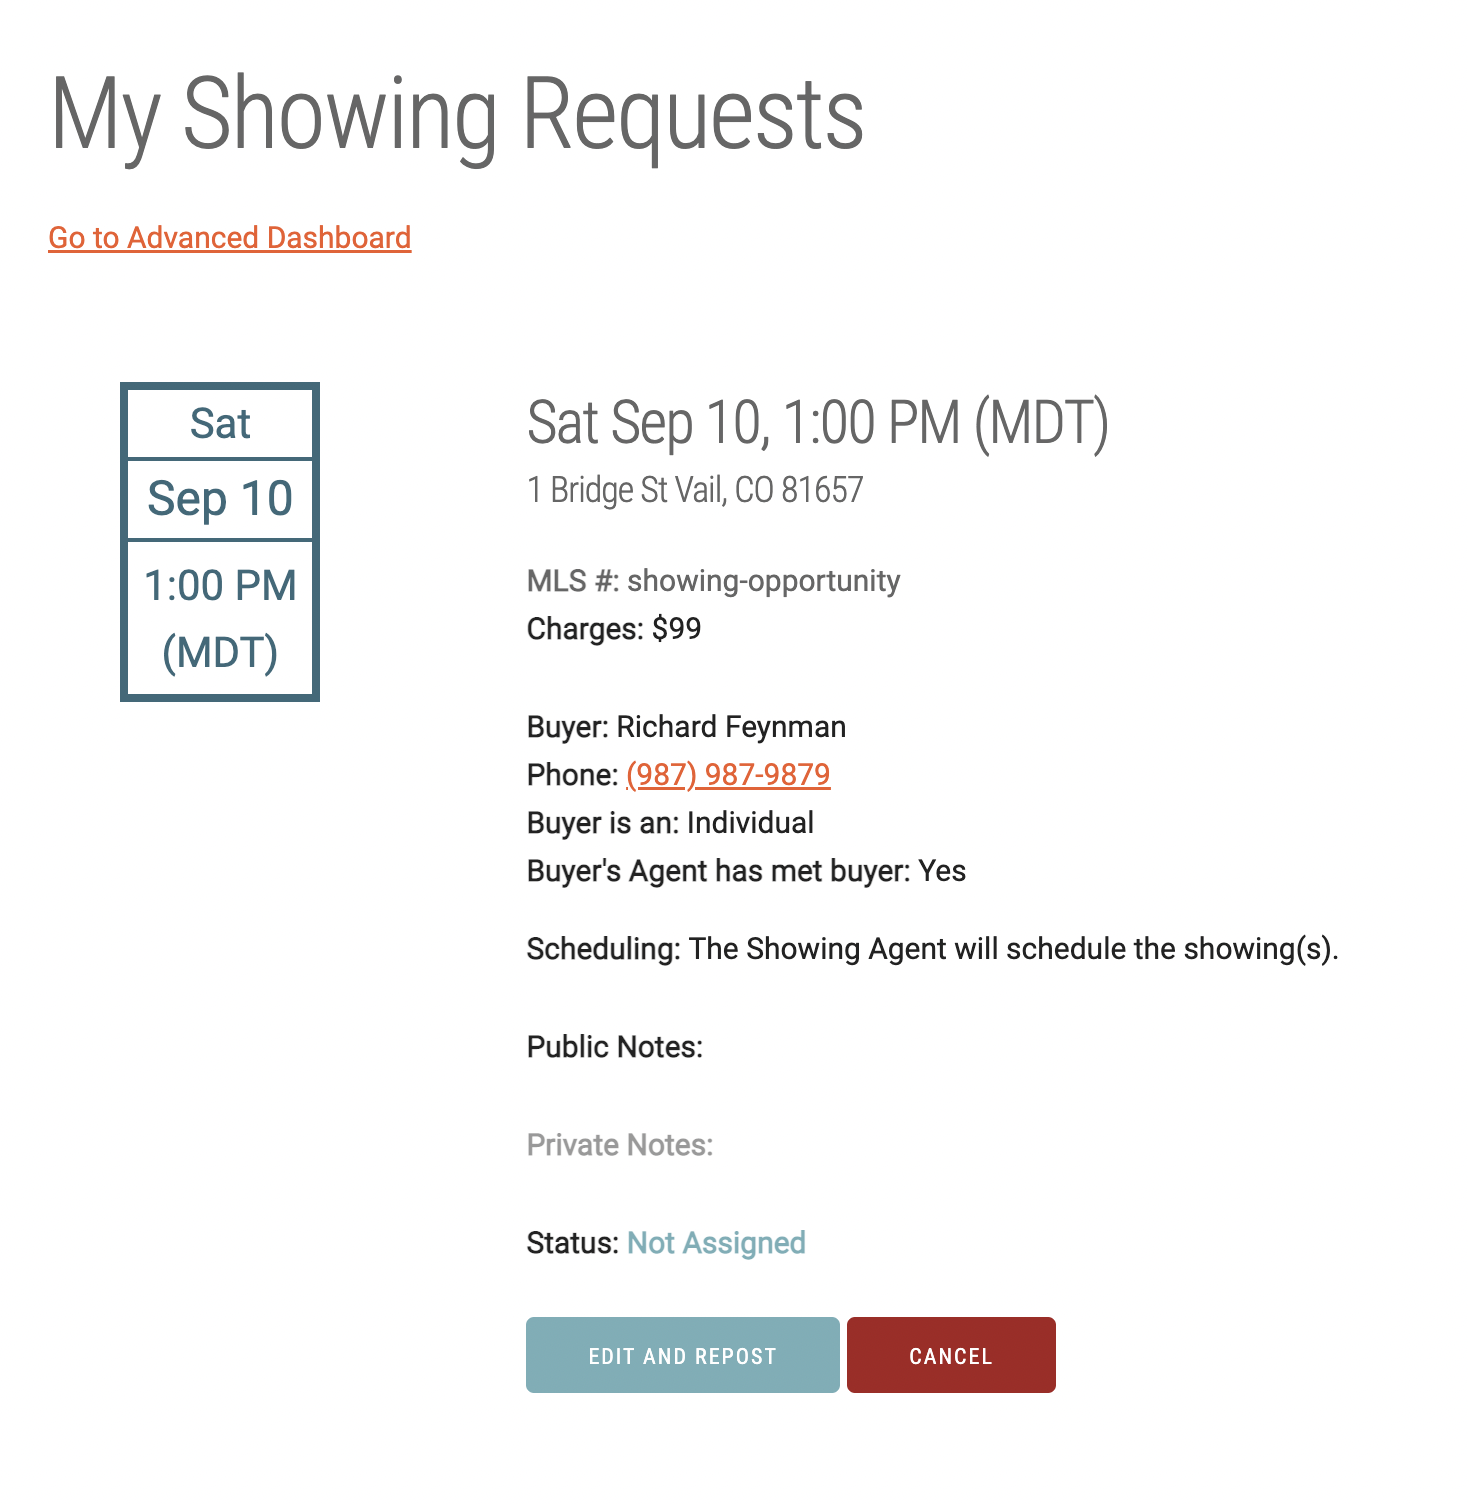 My Showing Requests page of a Showami account